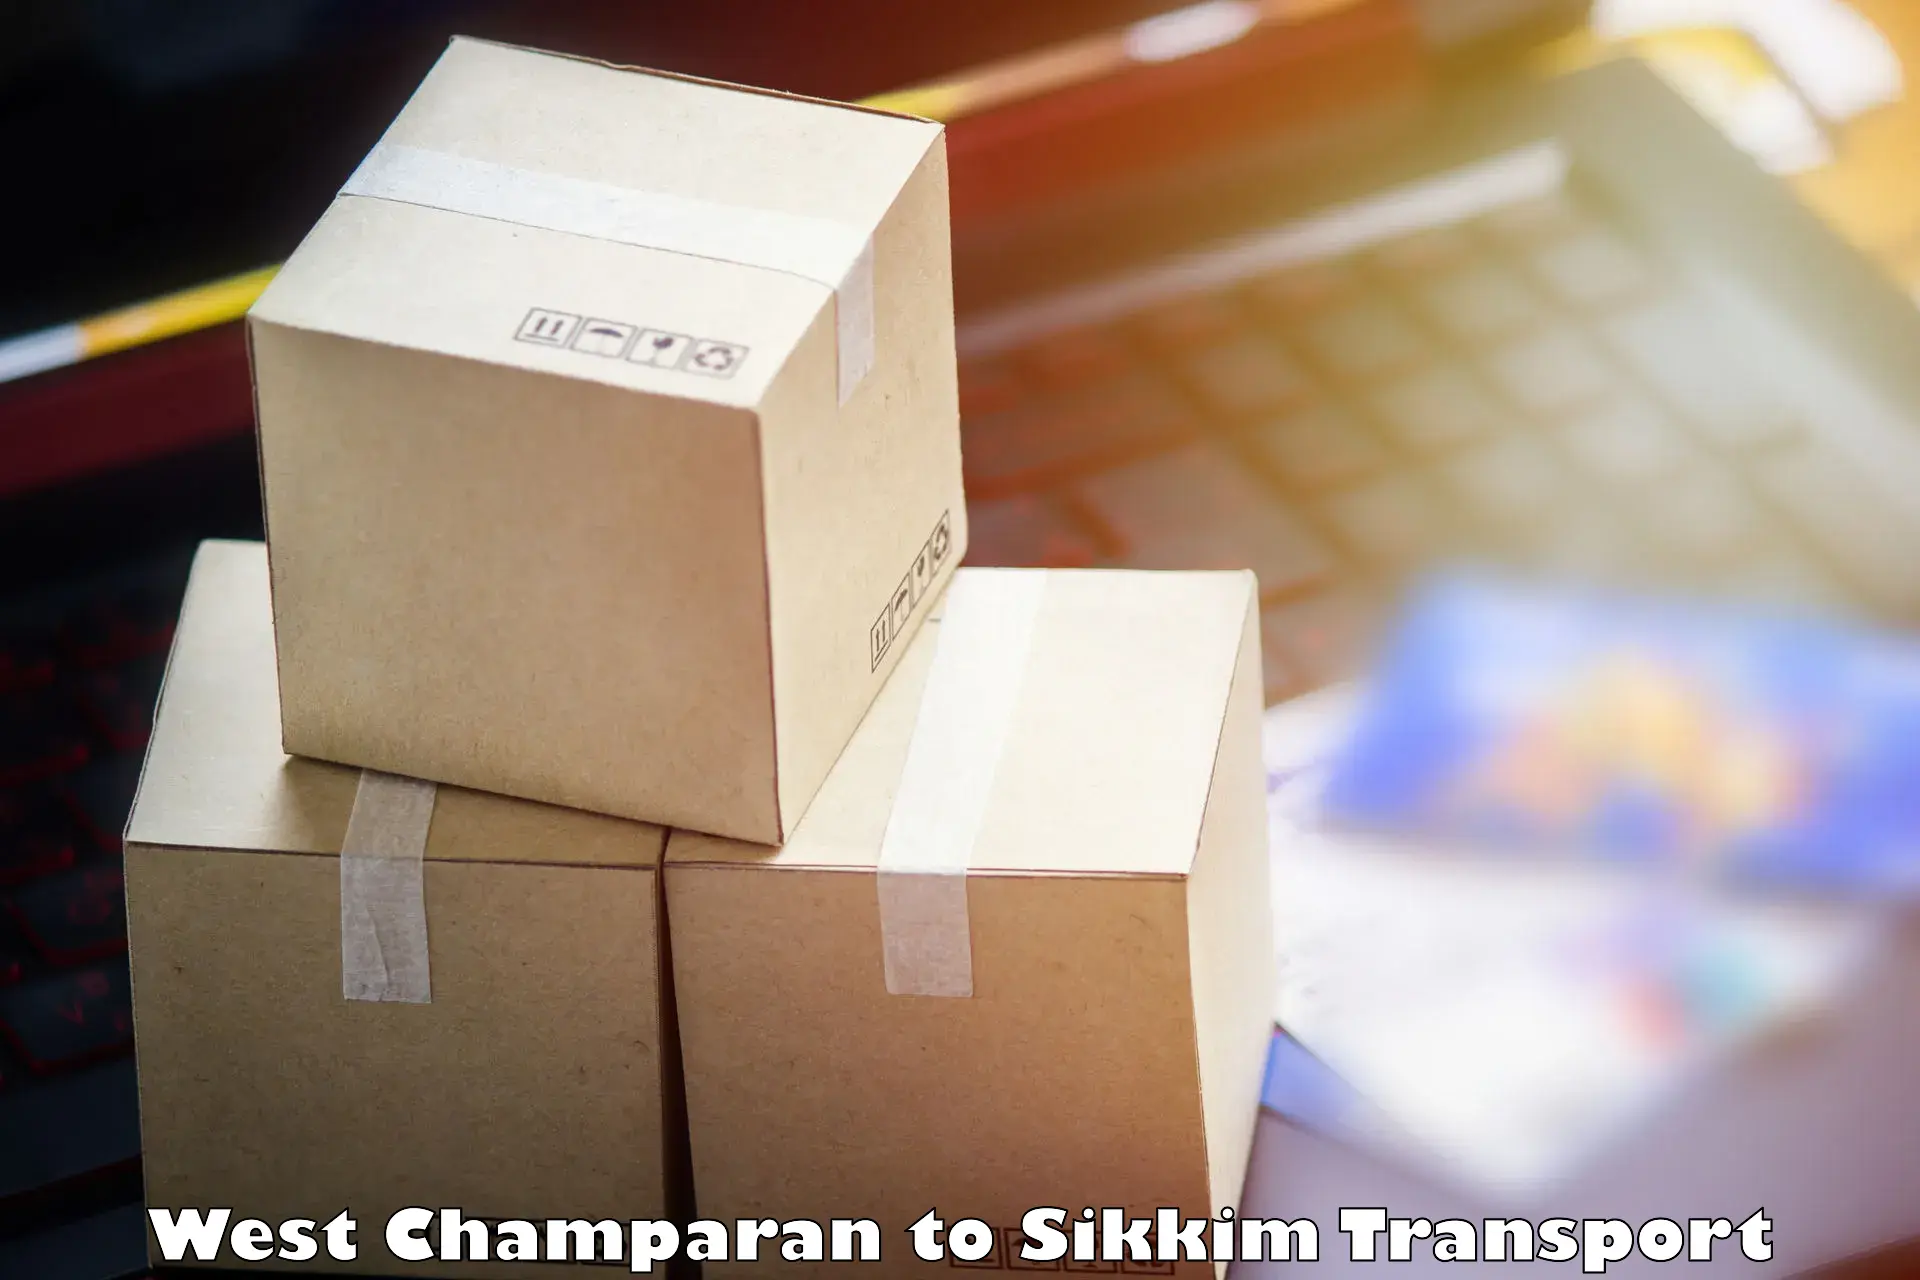 Pick up transport service West Champaran to North Sikkim